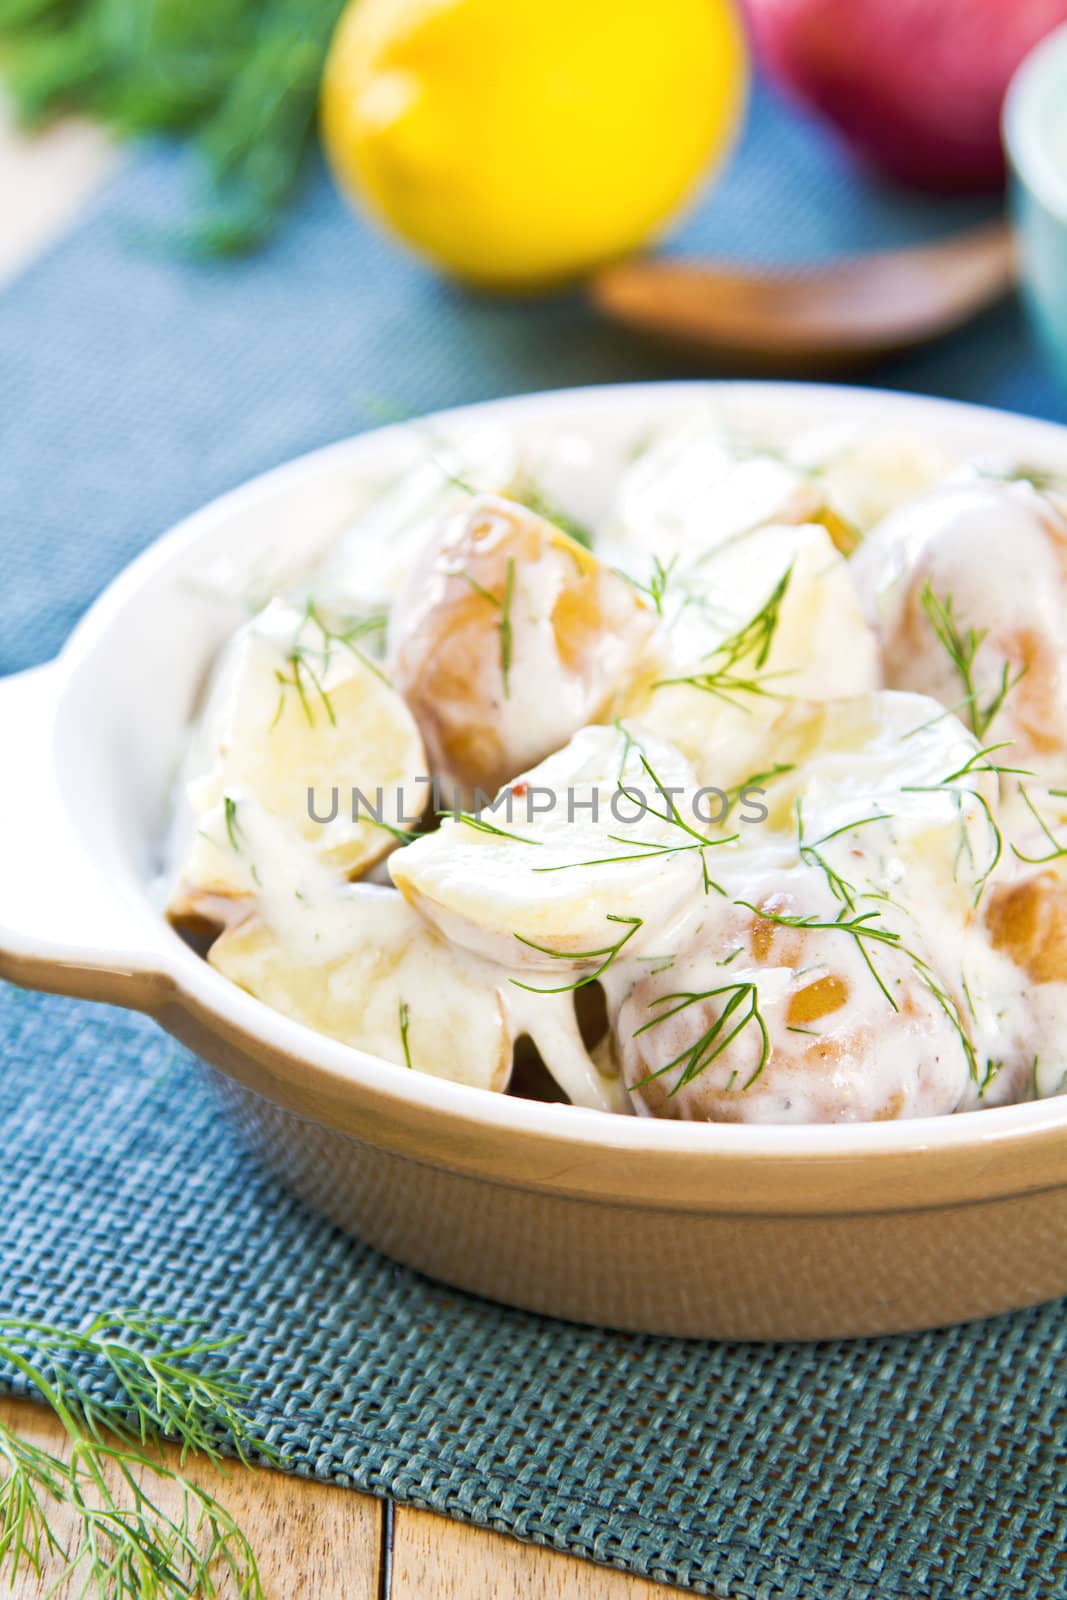 Potato with sour cream dressing salad by vanillaechoes